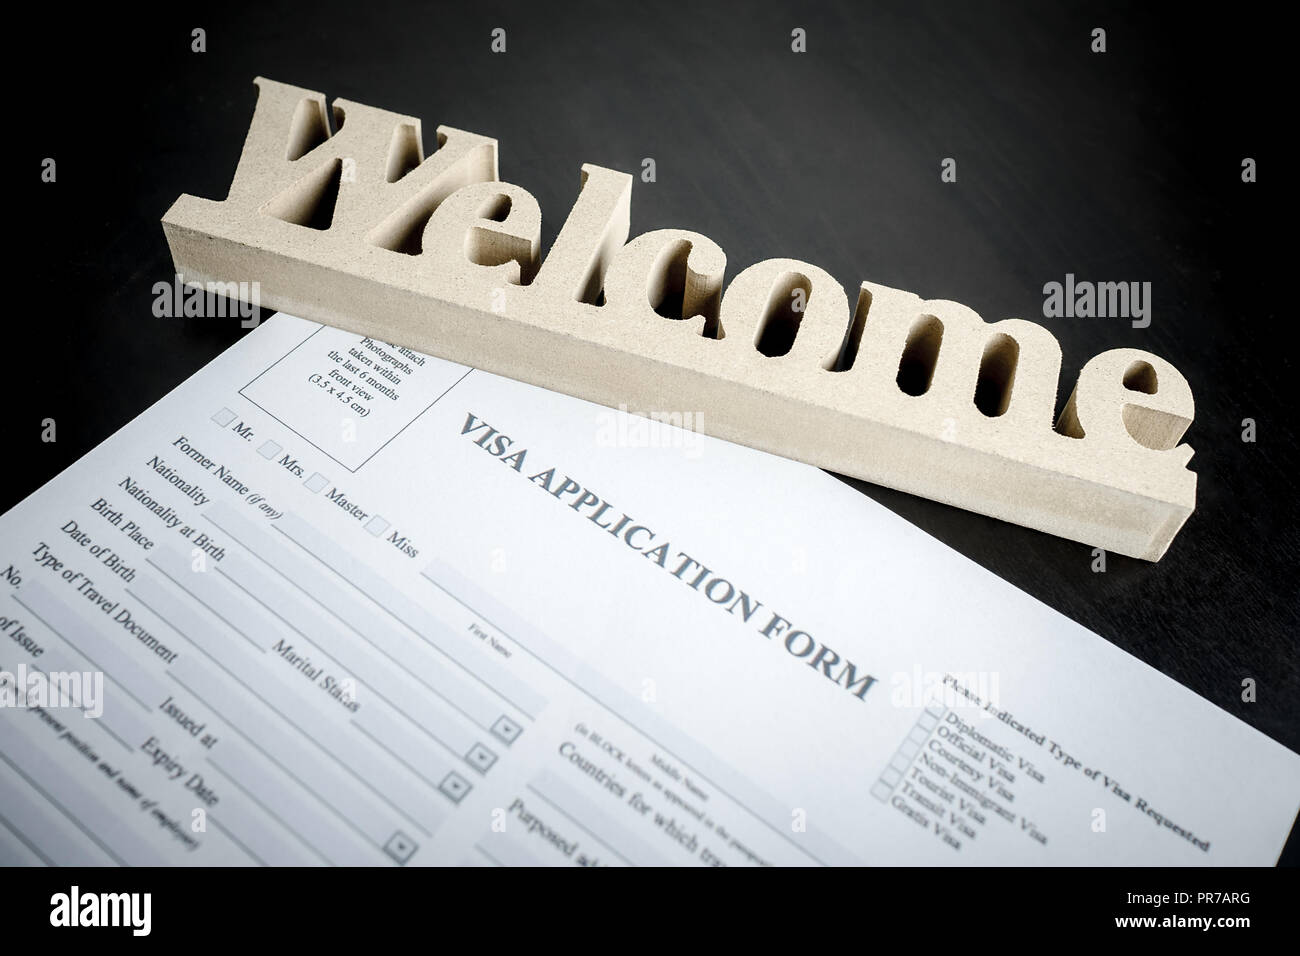 Welcome to easy Visa application form paper document Stock Photo